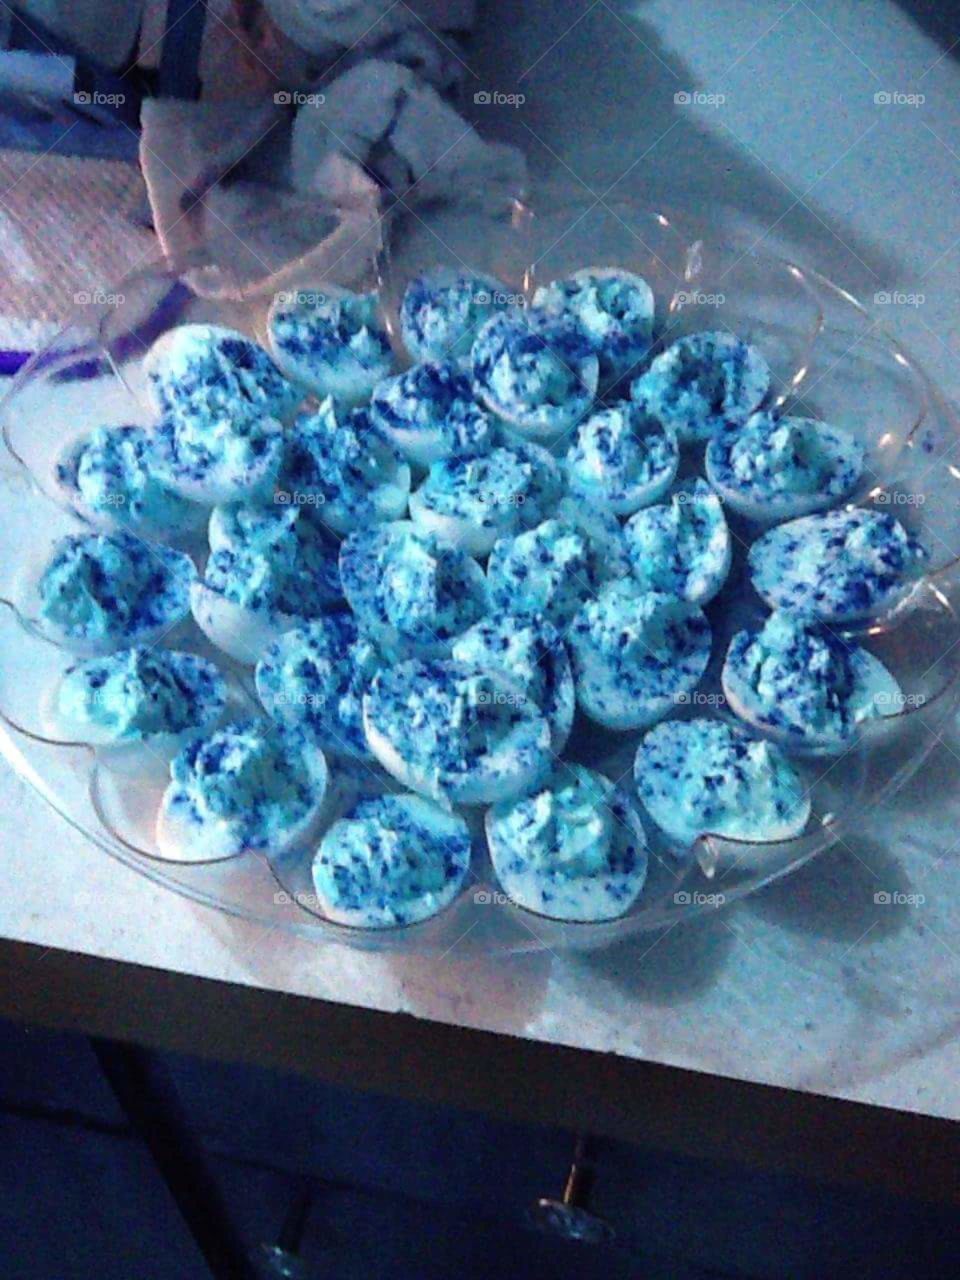 BLUE DEVILED EGGS ANY ONE